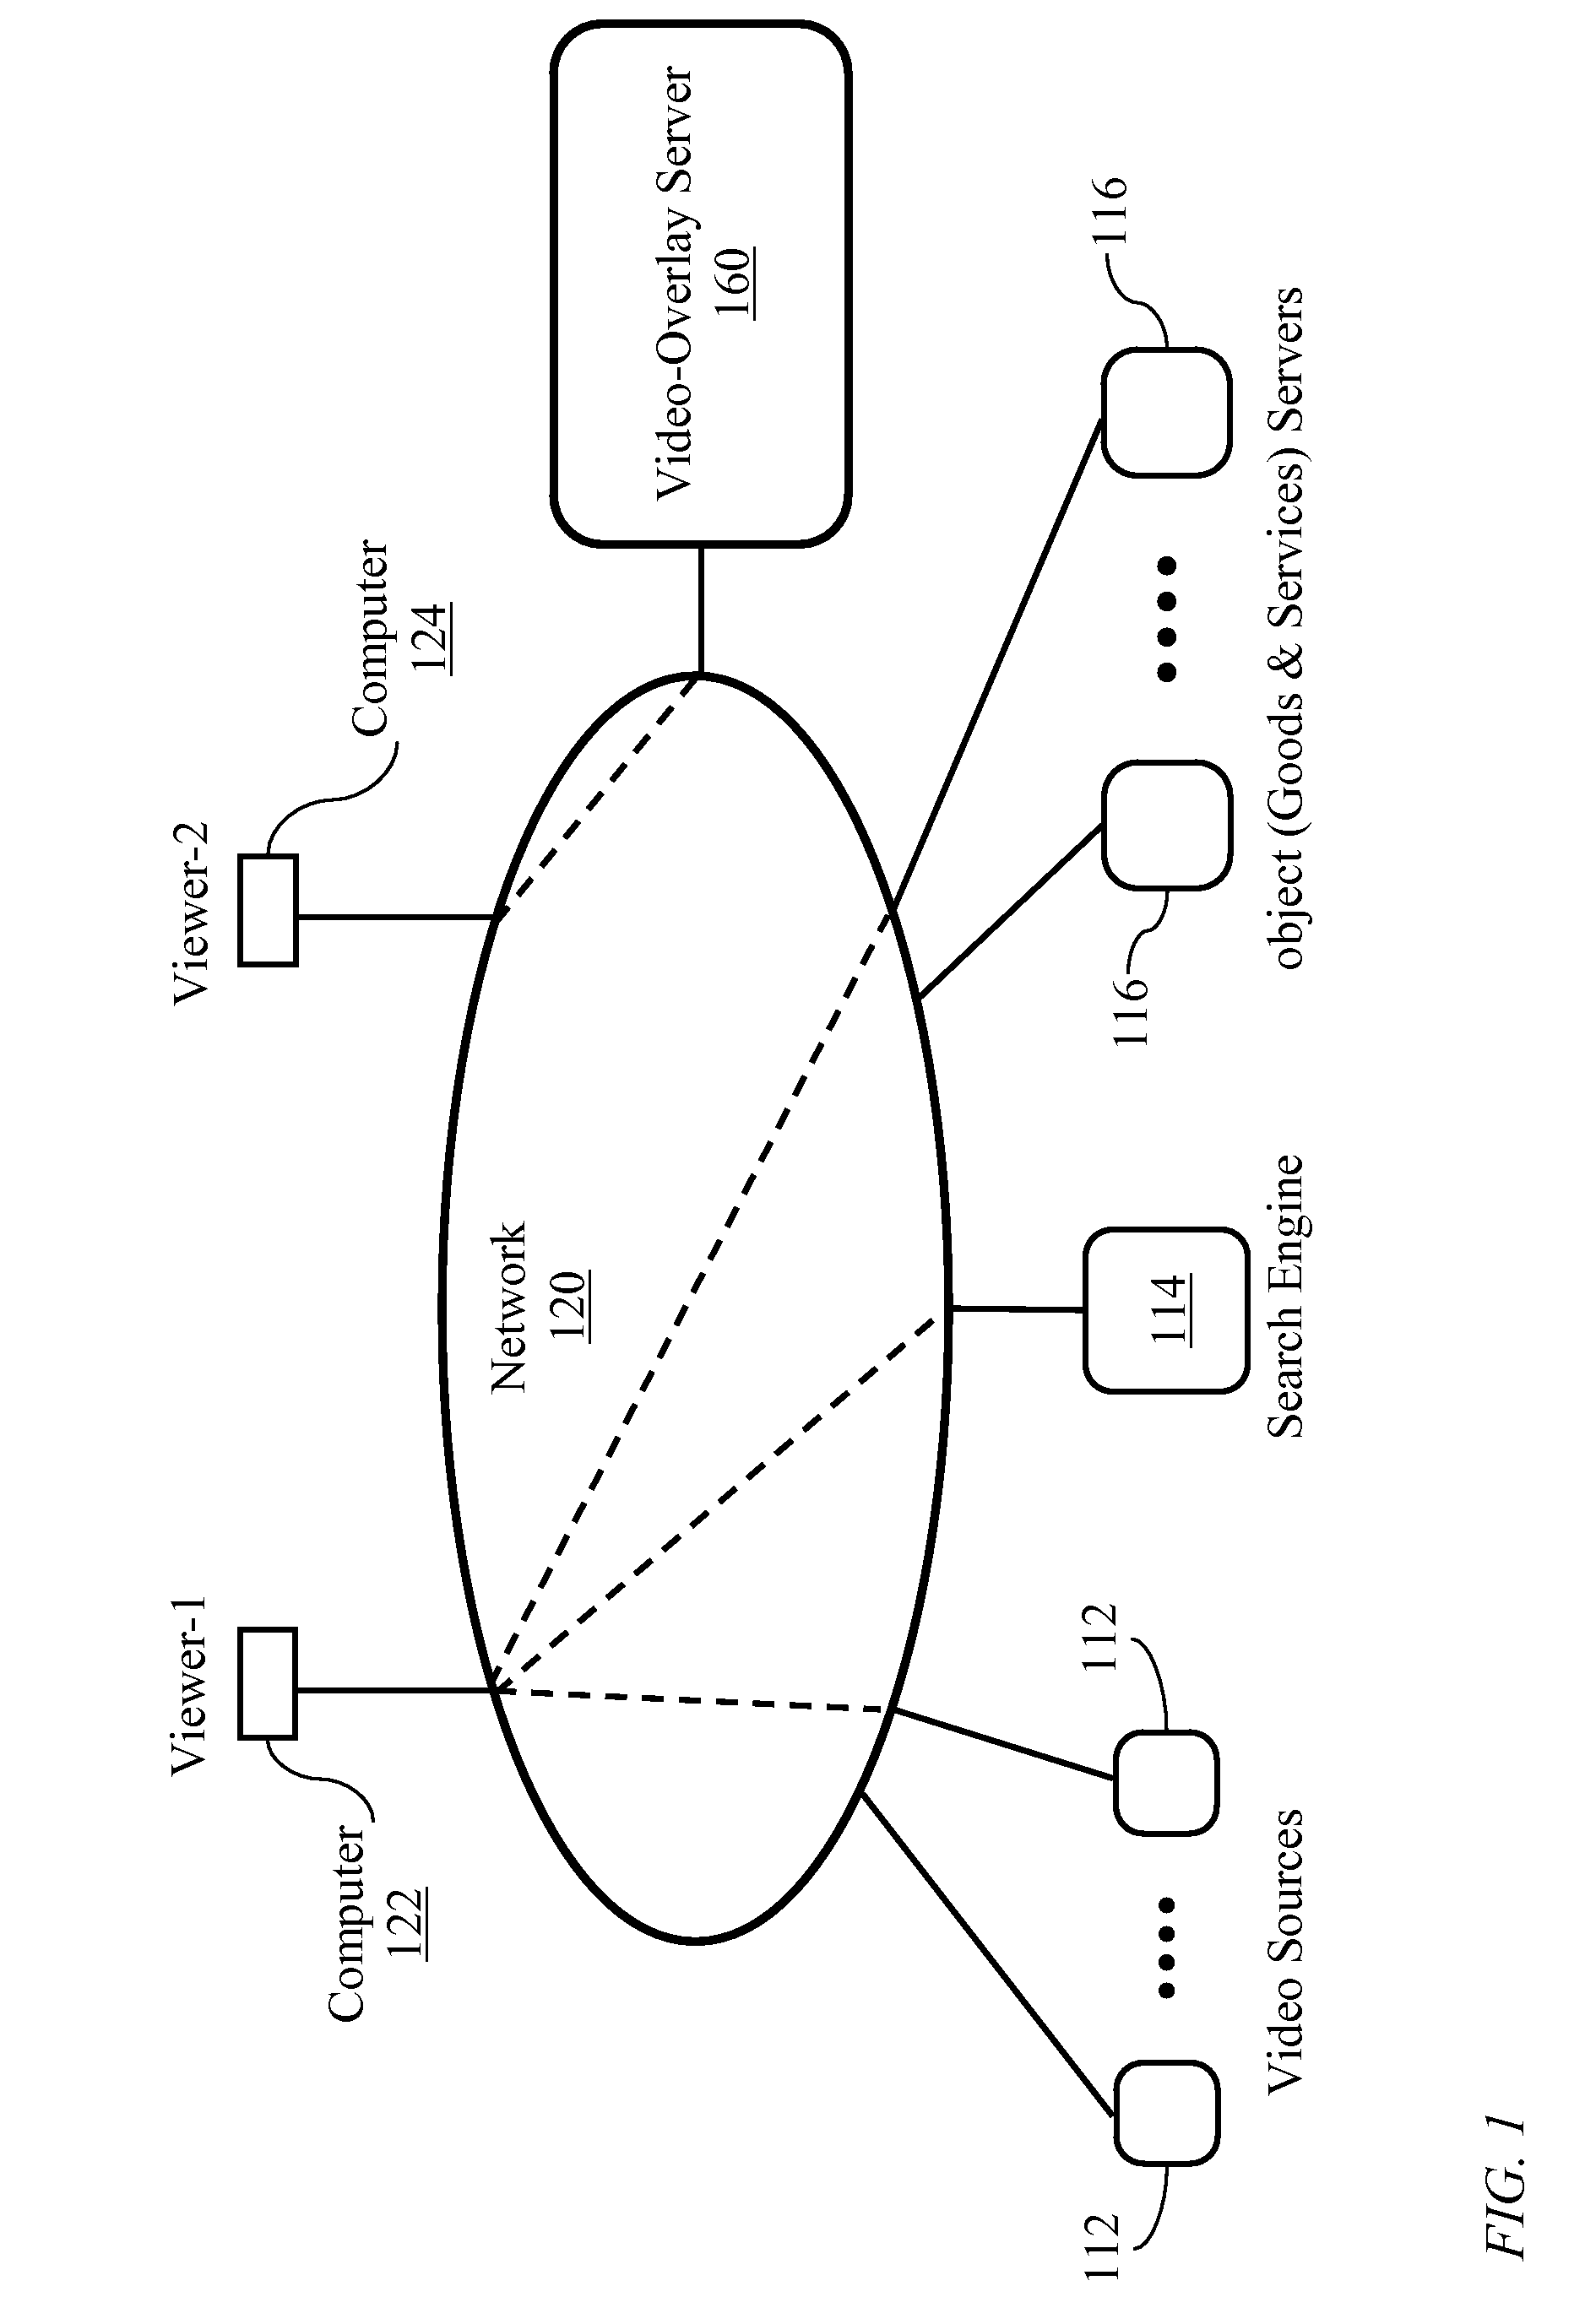 Video player for exhibiting content of video signals with content linking to information sources